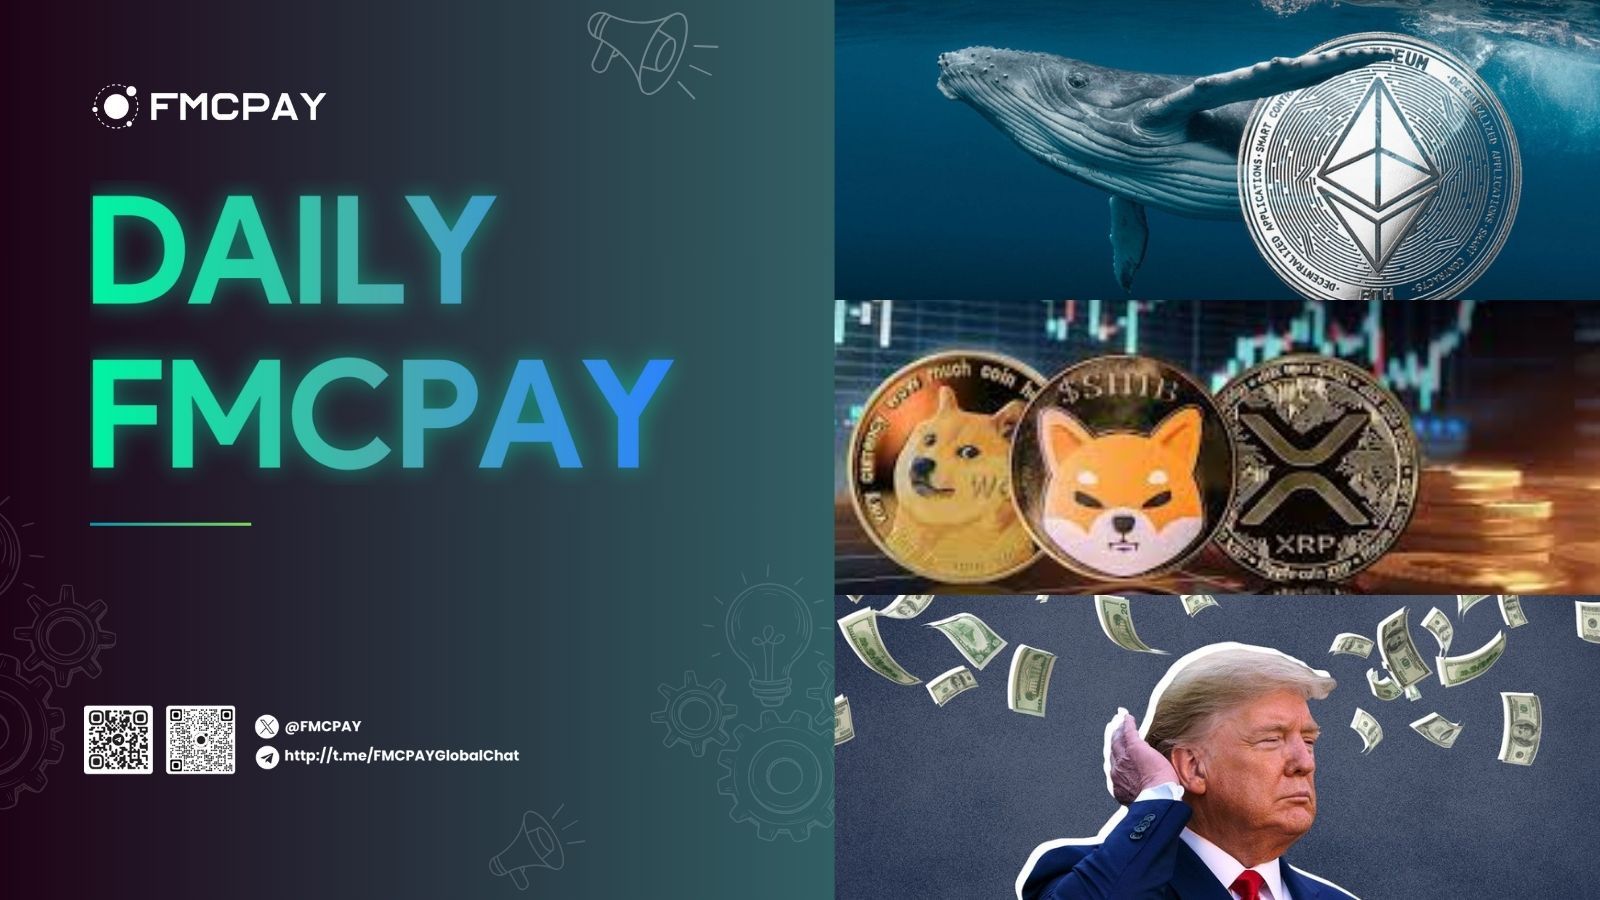 fmcpay ethereum eth price drops 5 as ico whale transfers 20m to kraken